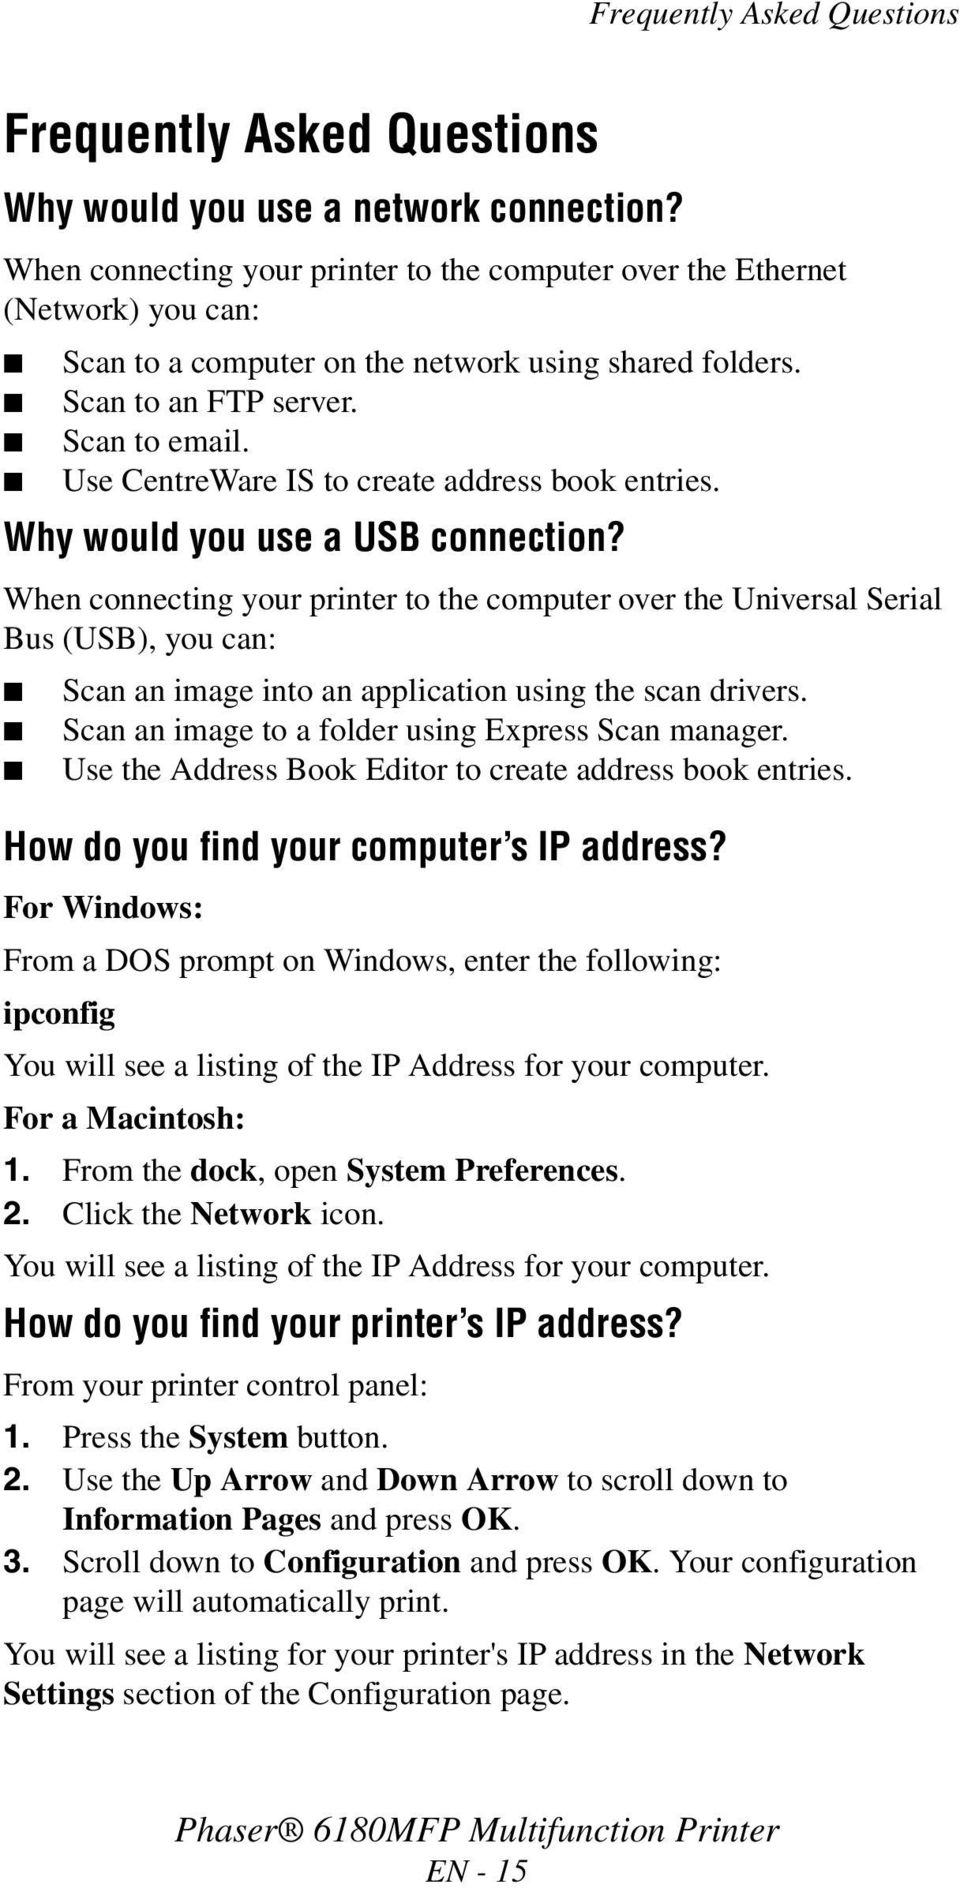 Use CentreWare IS to create address book entries. Why would you use a USB connection?